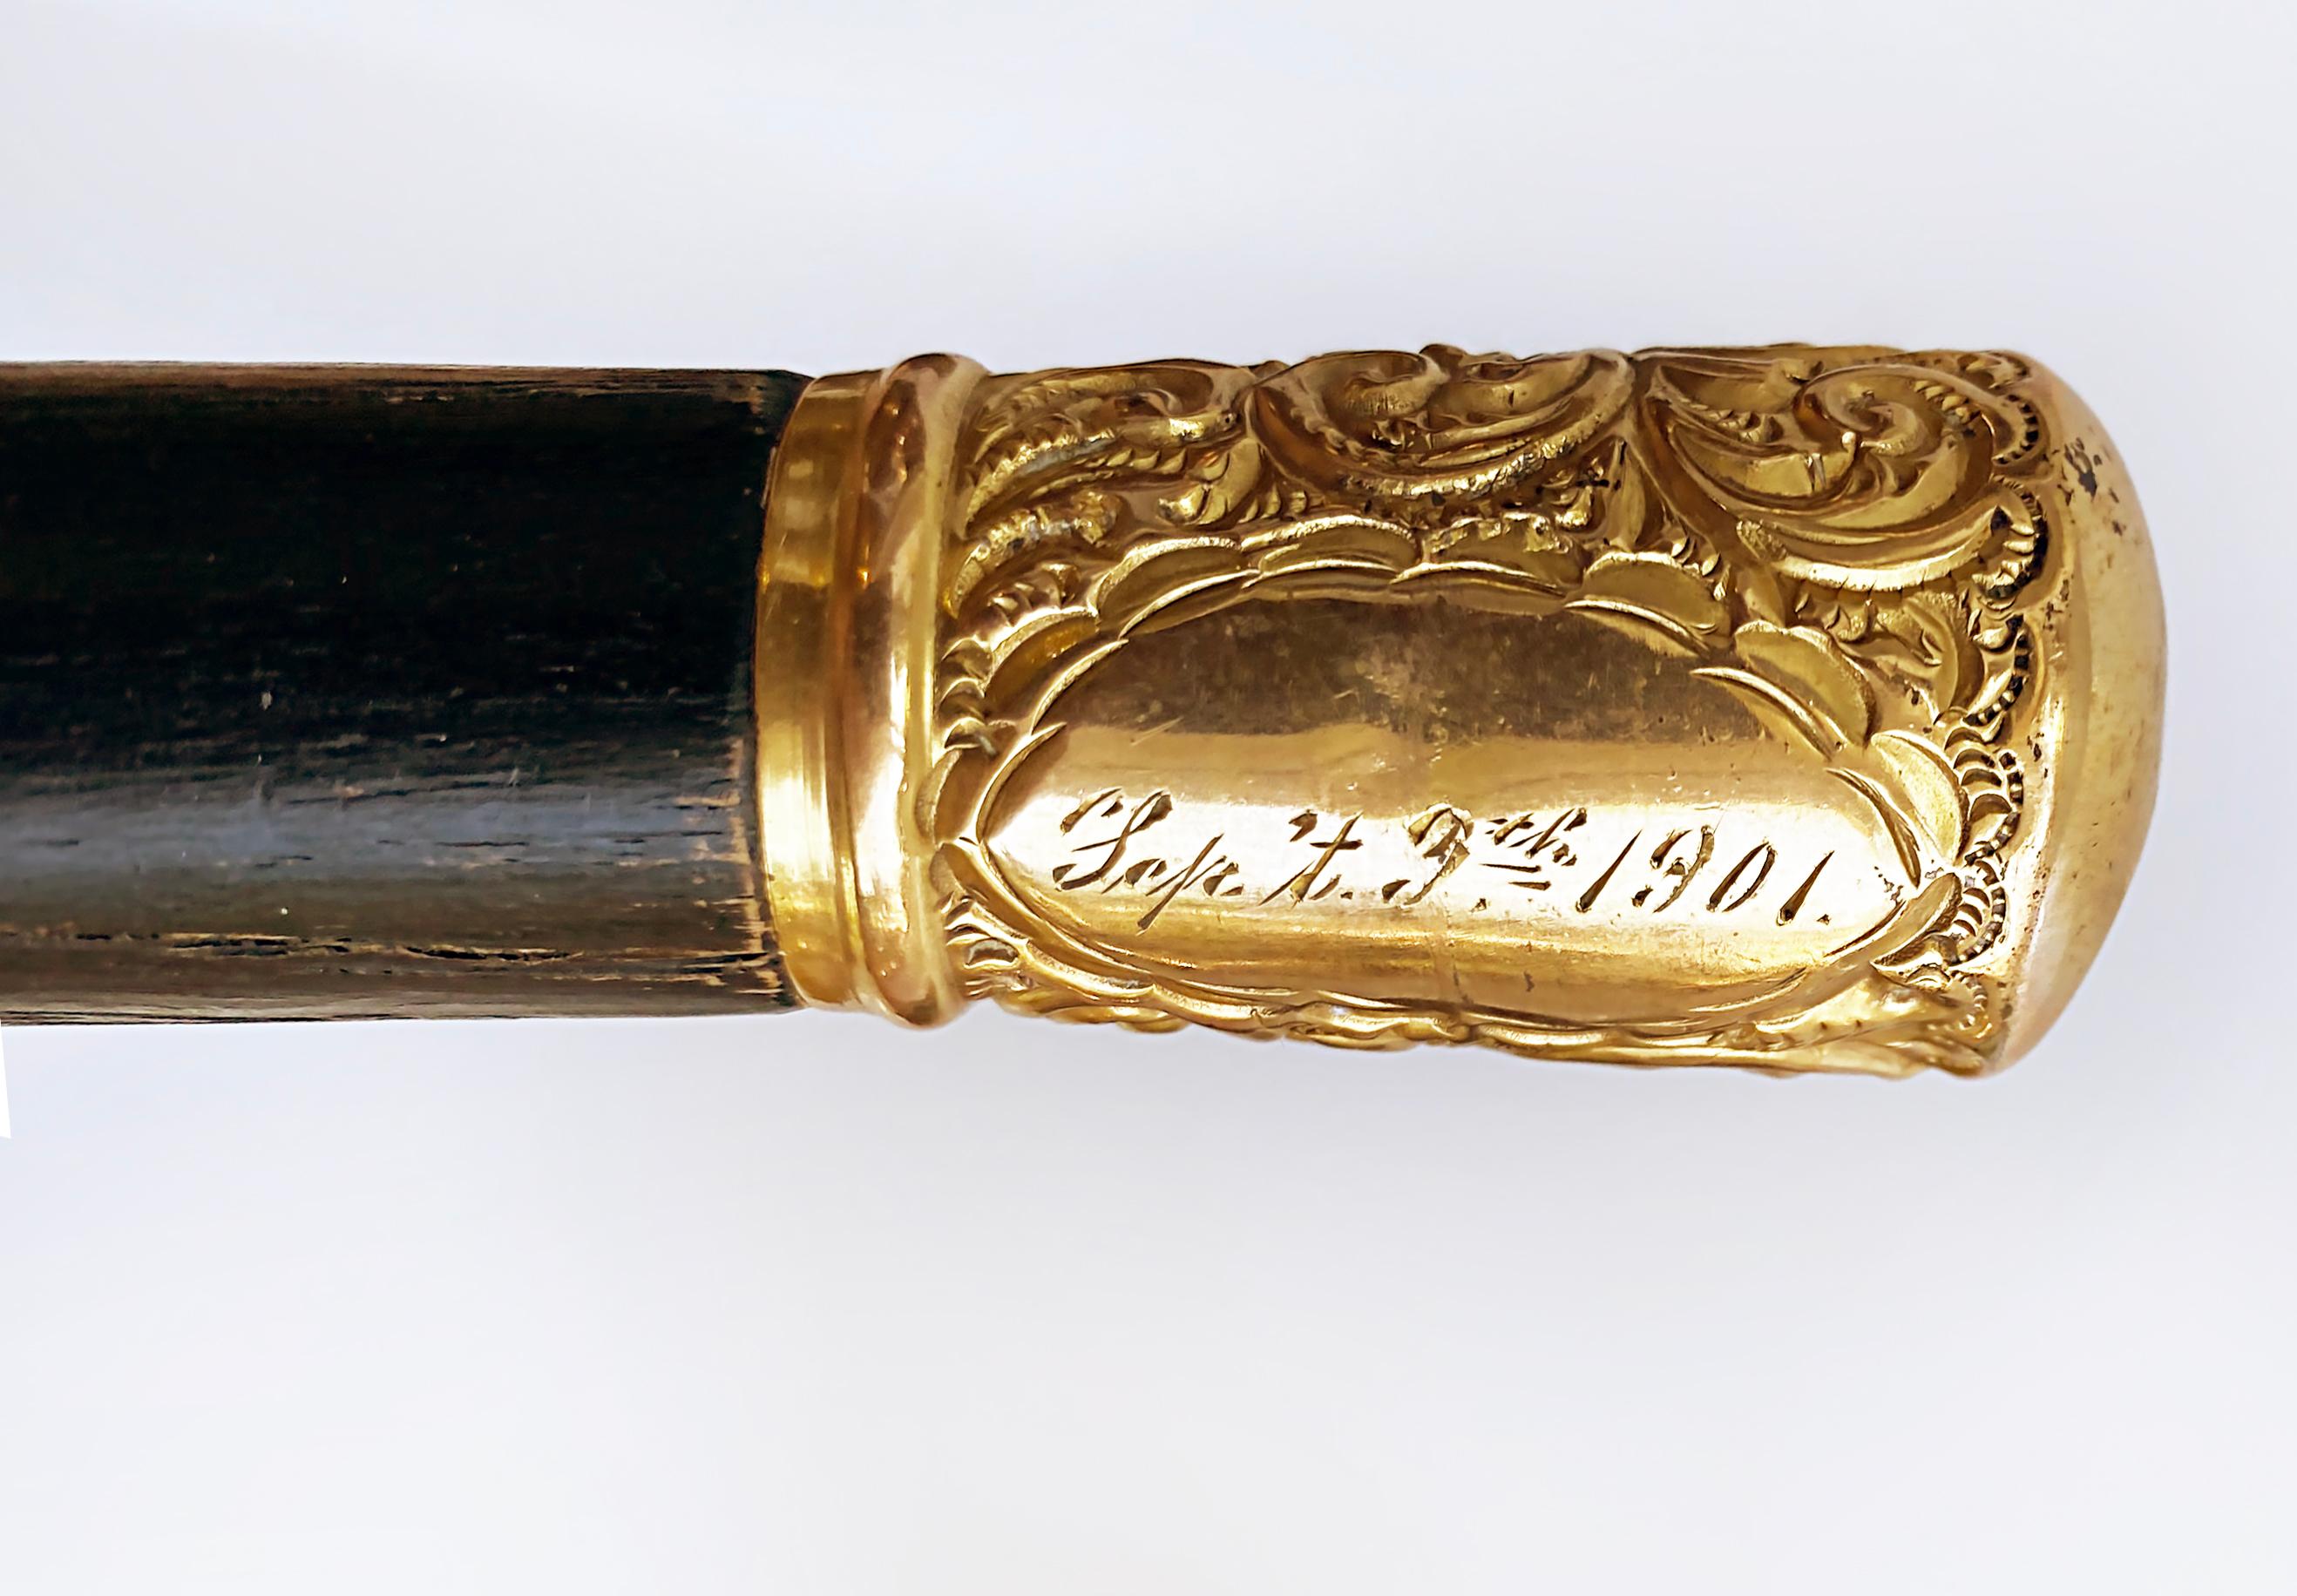 Antique 1901 Gold Handled Dandy Walking Stick, Monogrammed Date

Offered for sale is an antique 